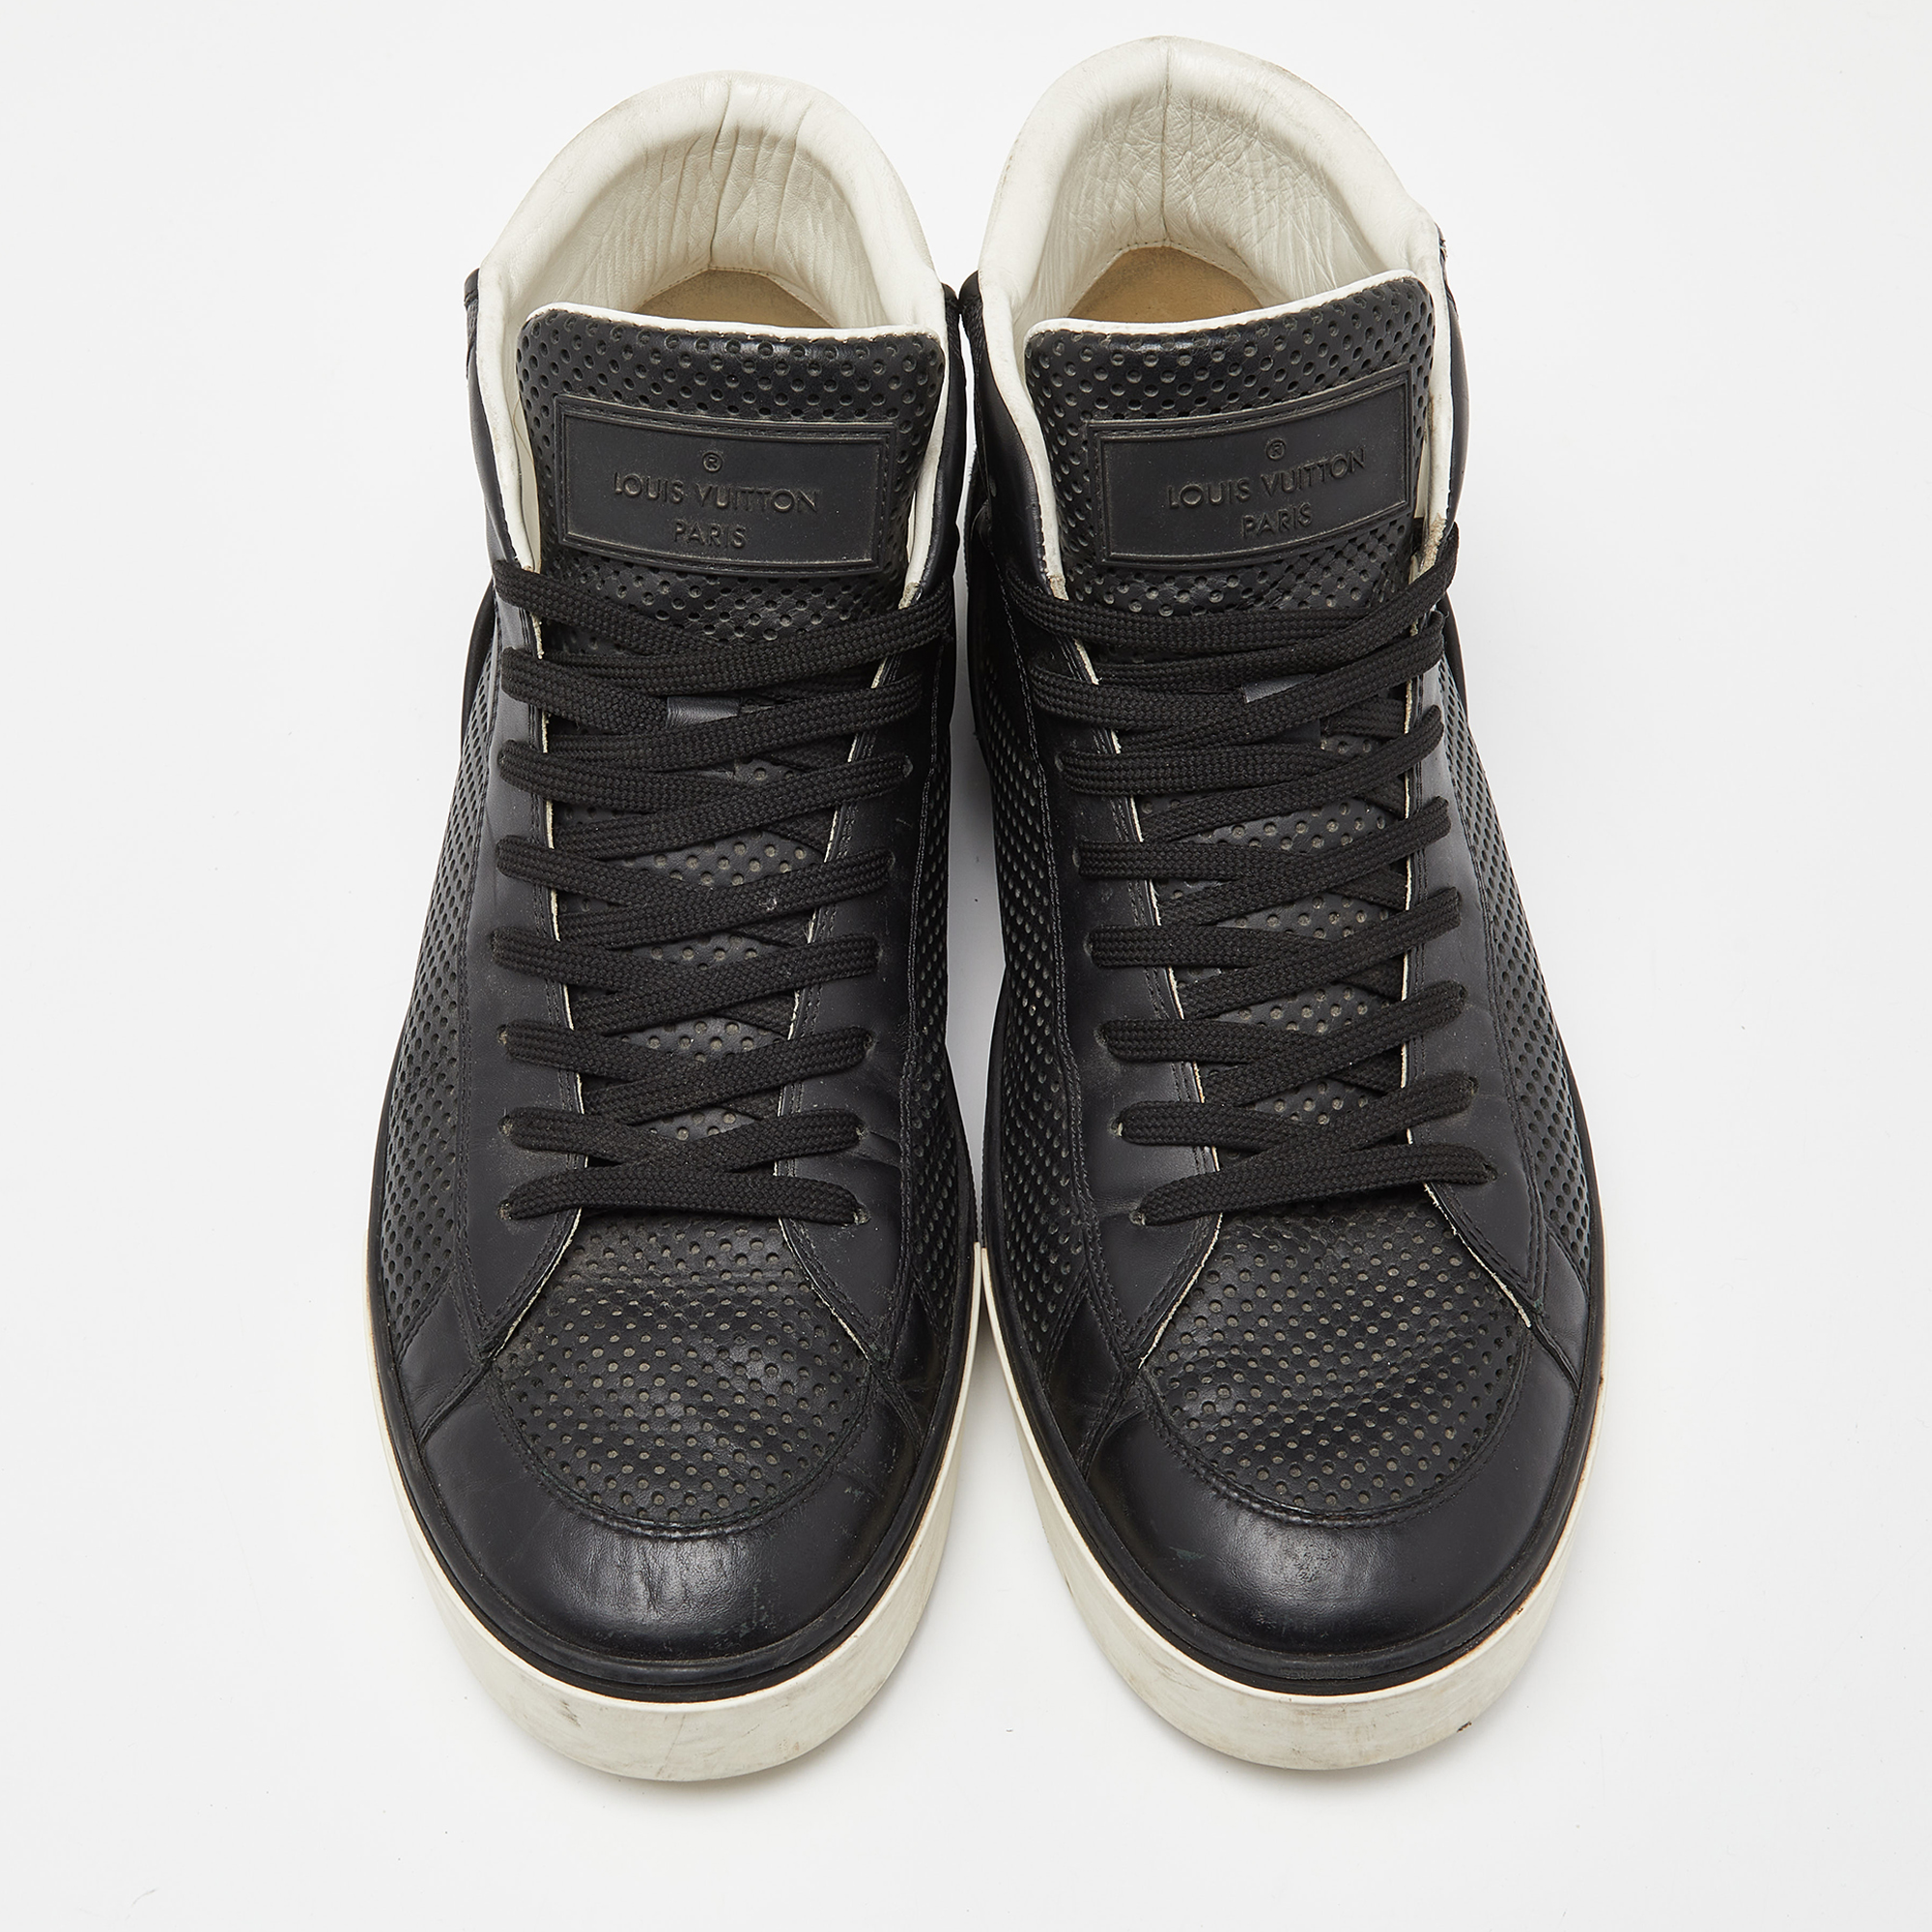 Louis Vuitton Black Leather,Monogram Canvas And Suede Line Up High Top Sneakers Size 43